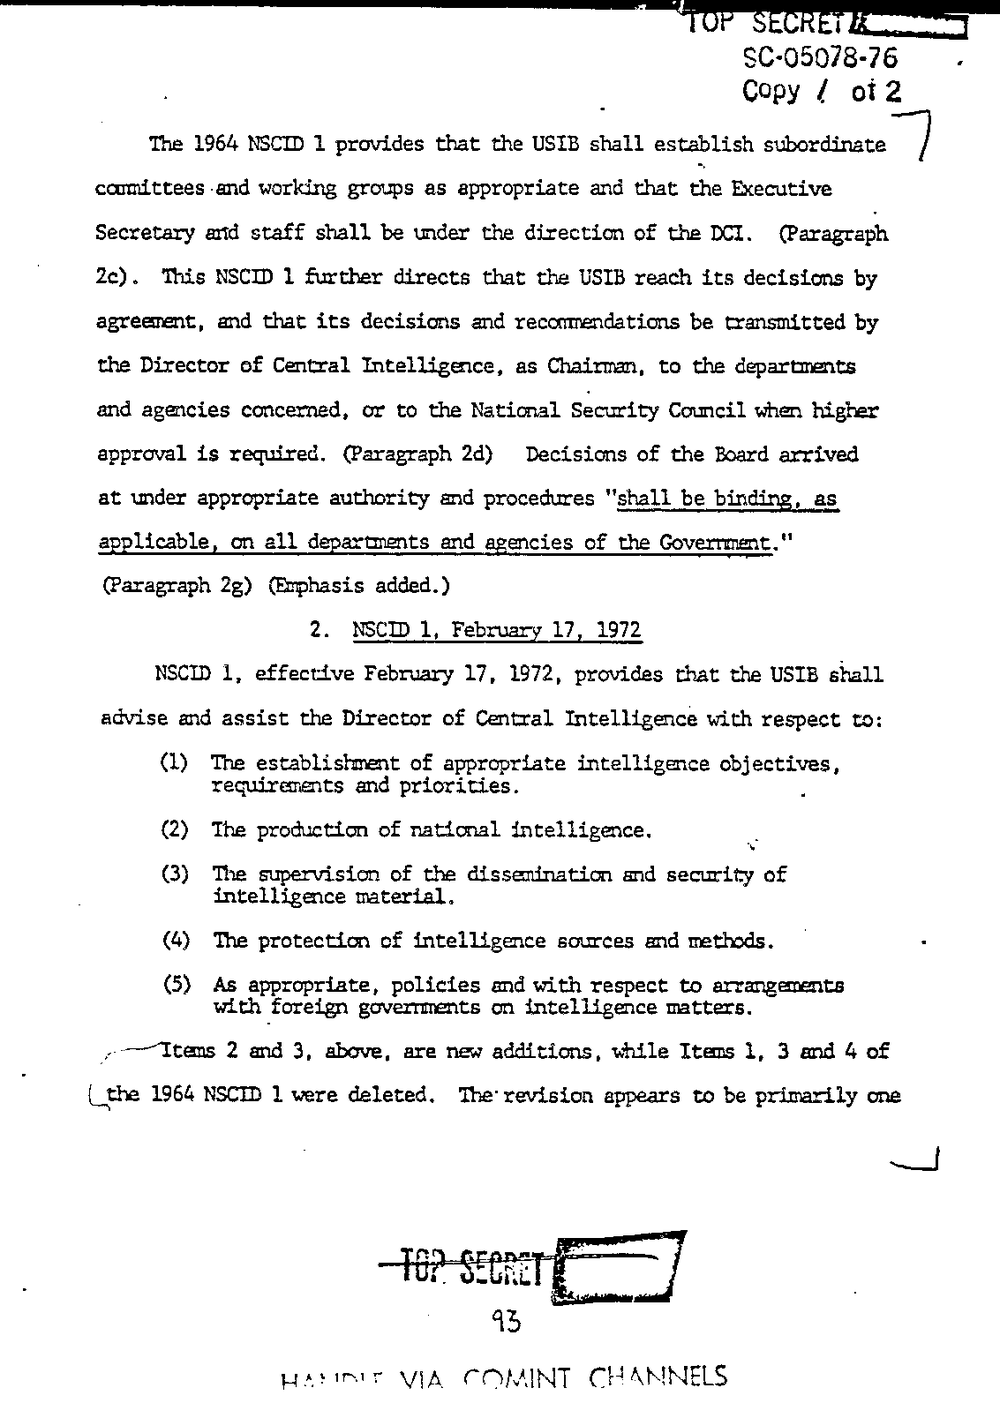 Page 101 from Report on Inquiry Into CIA Related Electronic Surveillance Activities